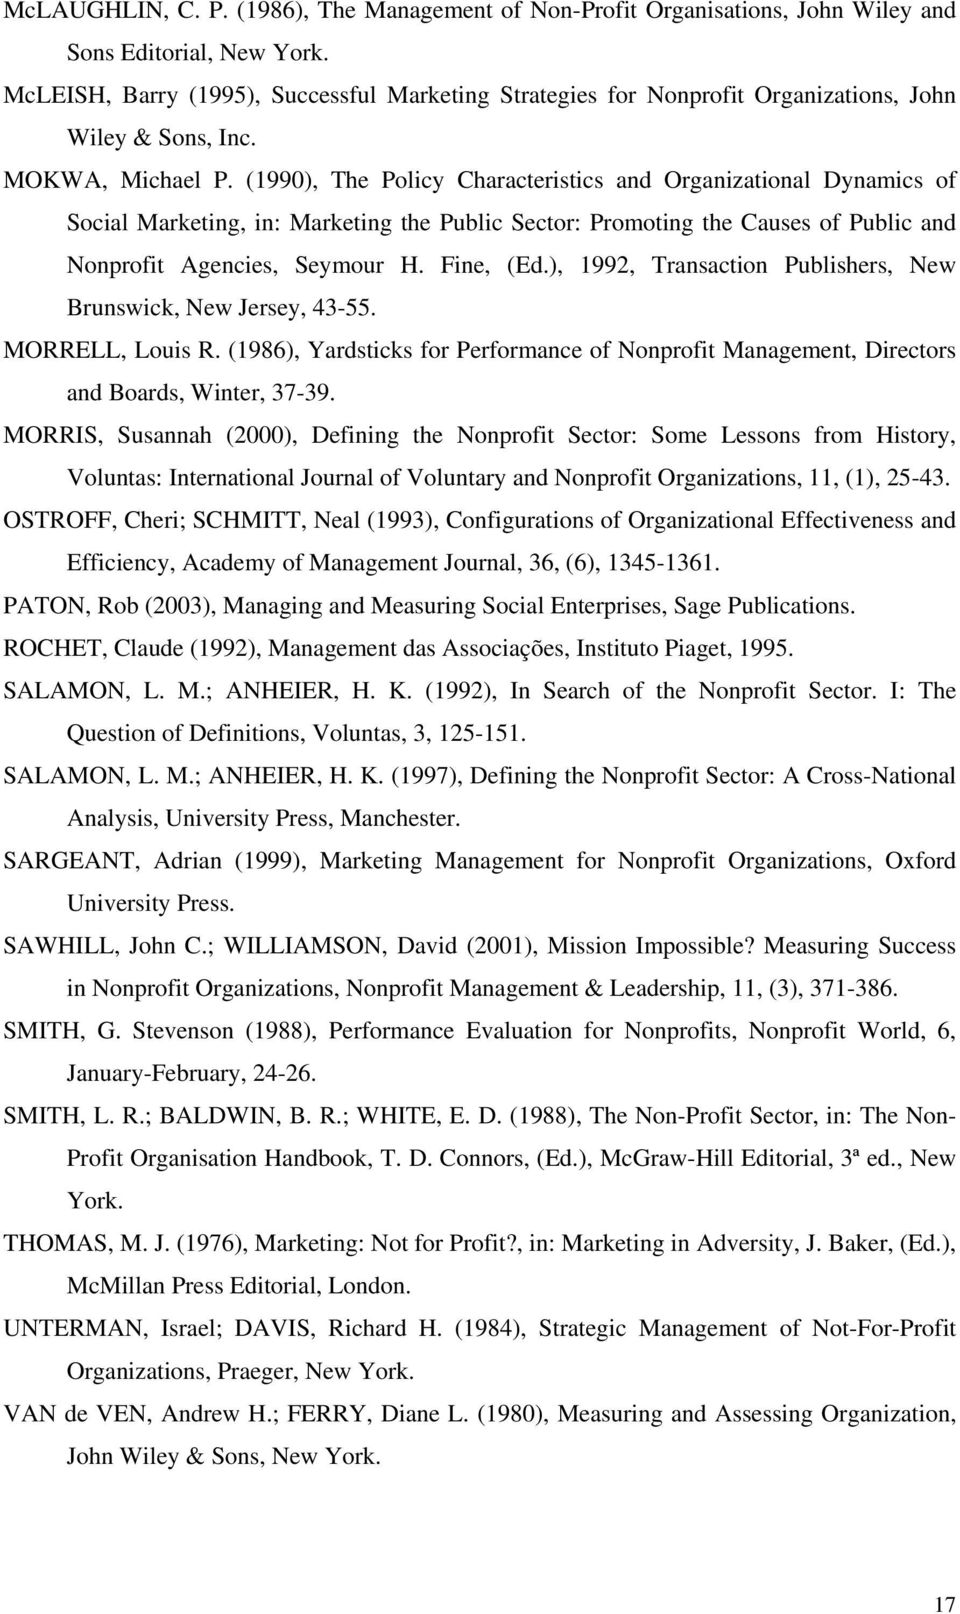 (1990), The Policy Characteristics and Organizational Dynamics of Social Marketing, in: Marketing the Public Sector: Promoting the Causes of Public and Nonprofit Agencies, Seymour H. Fine, (Ed.